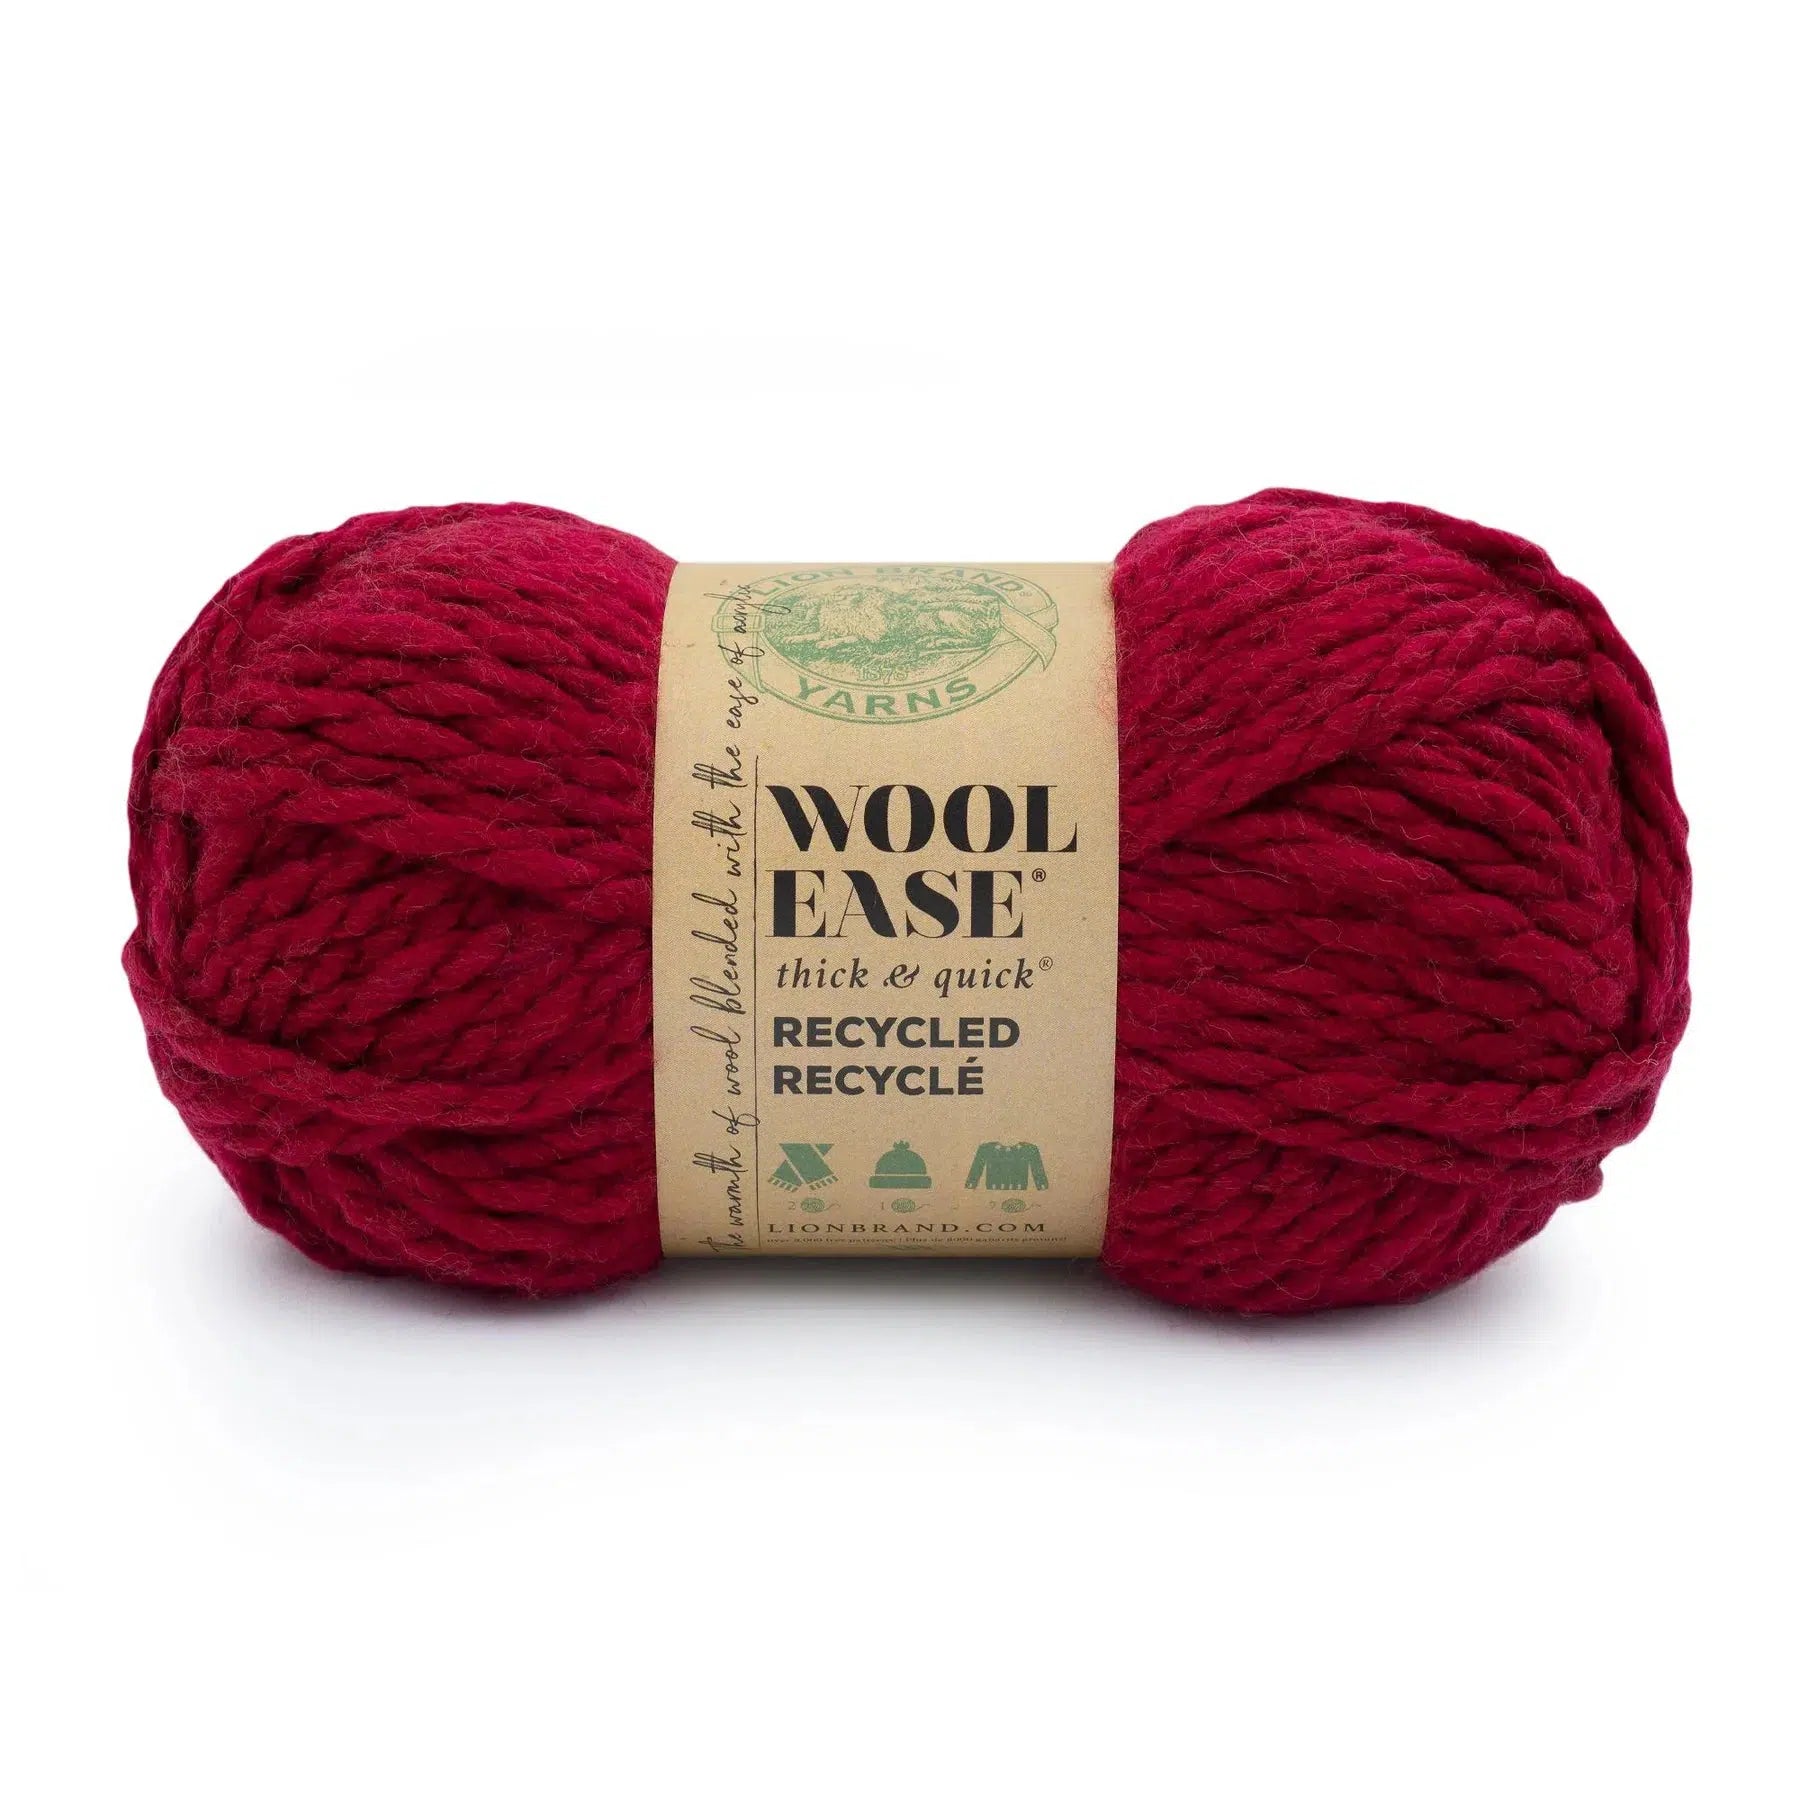  Lion Brand Yarn Wool-Ease Thick & Quick Yarn